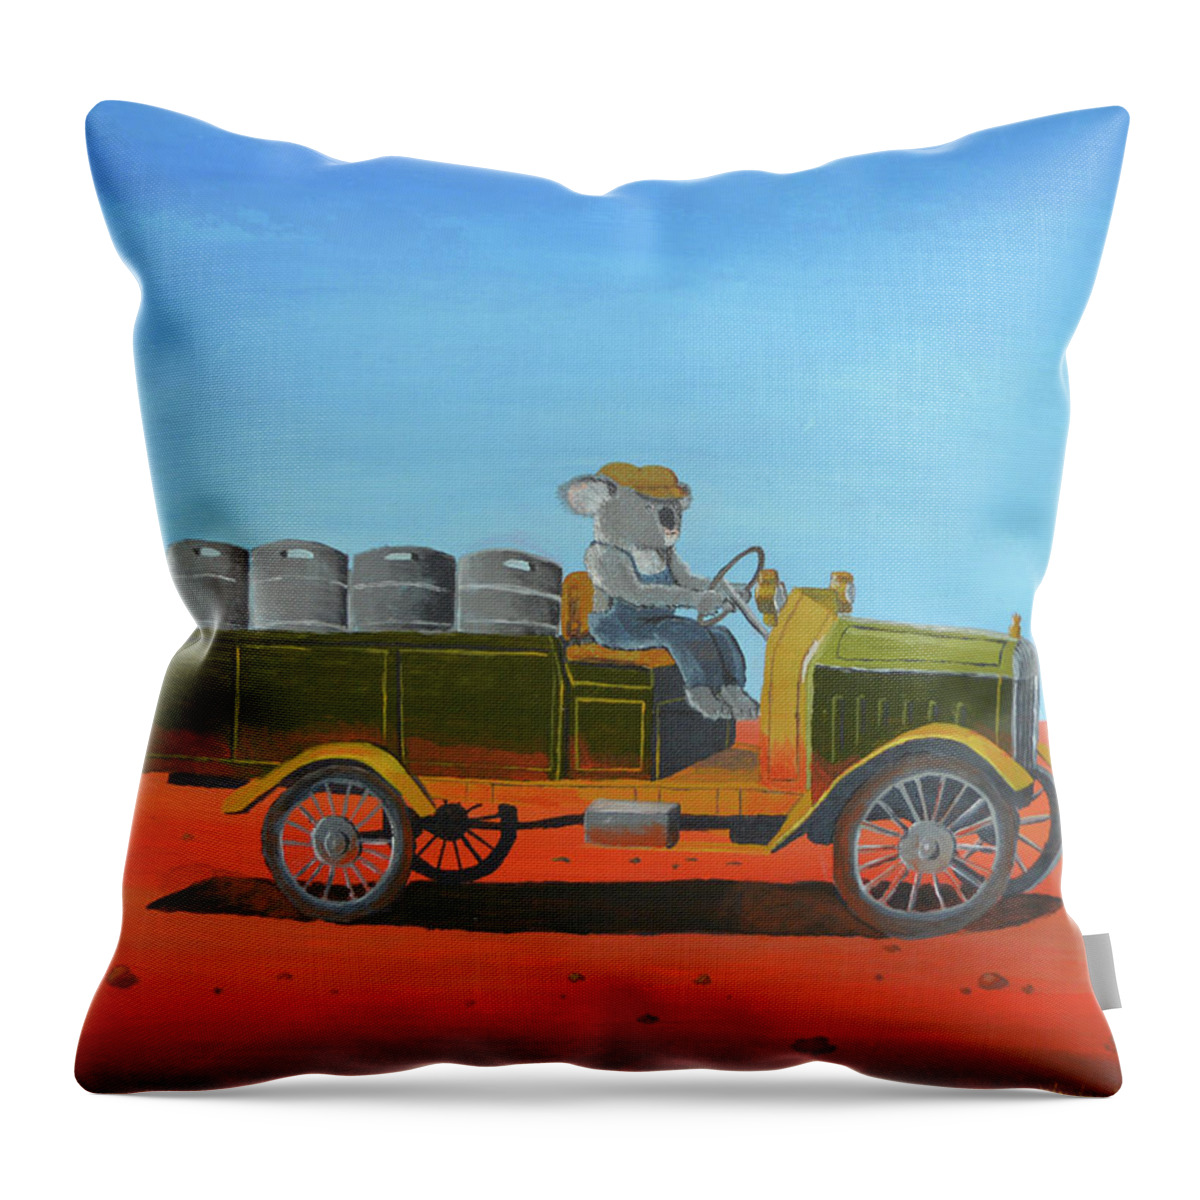 Beer Truck Throw Pillow featuring the painting Aussie Beer Truck by Winton Bochanowicz